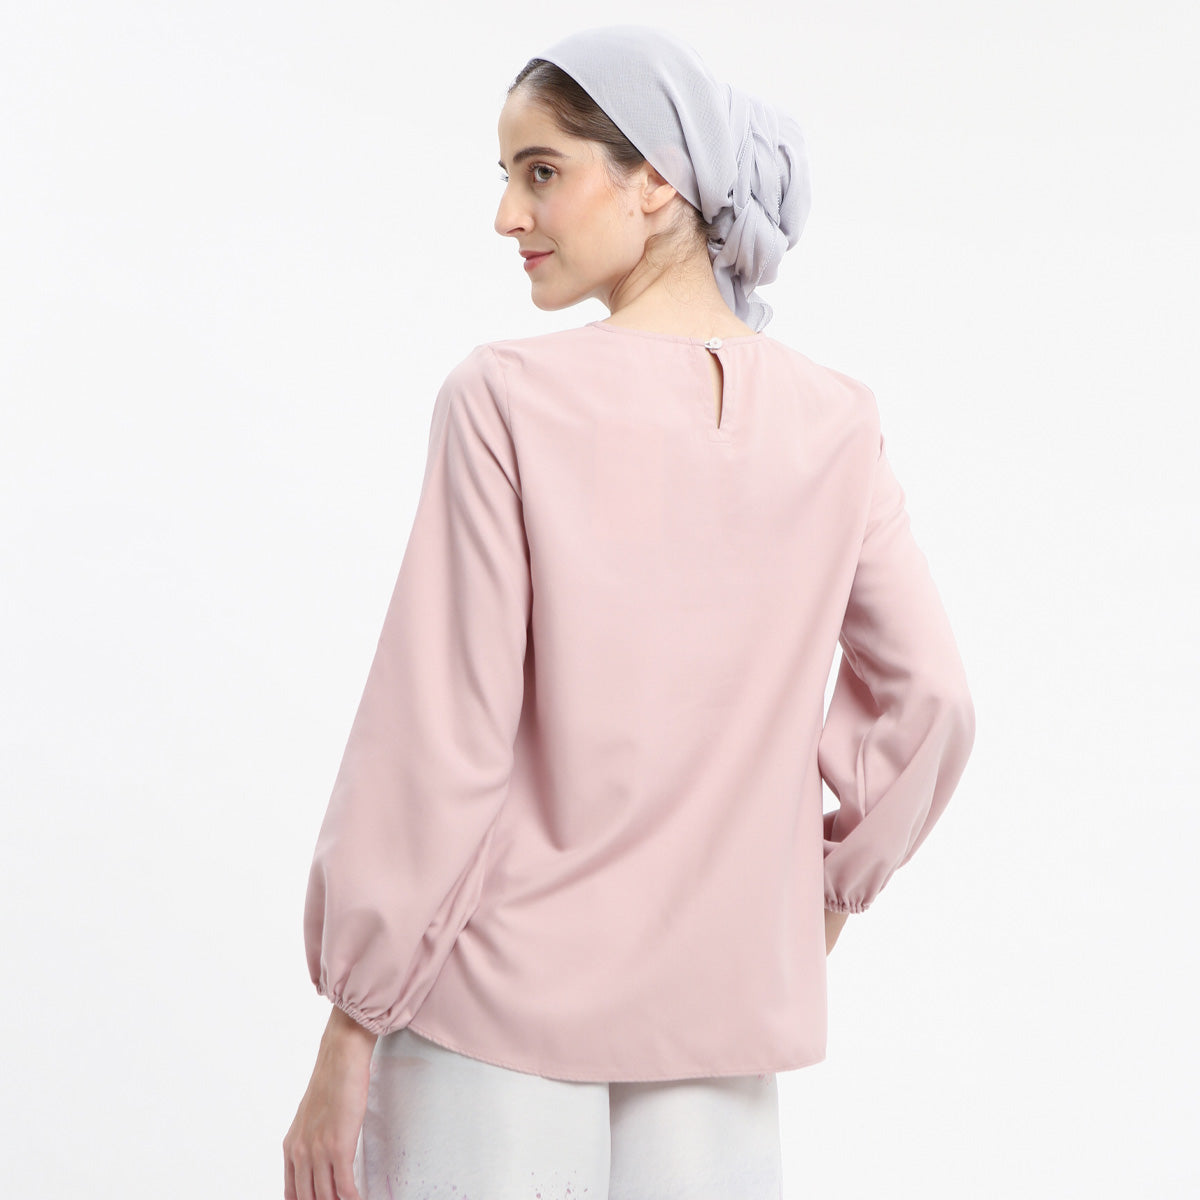 Brillie Dusty Pink Tops | HijabChic